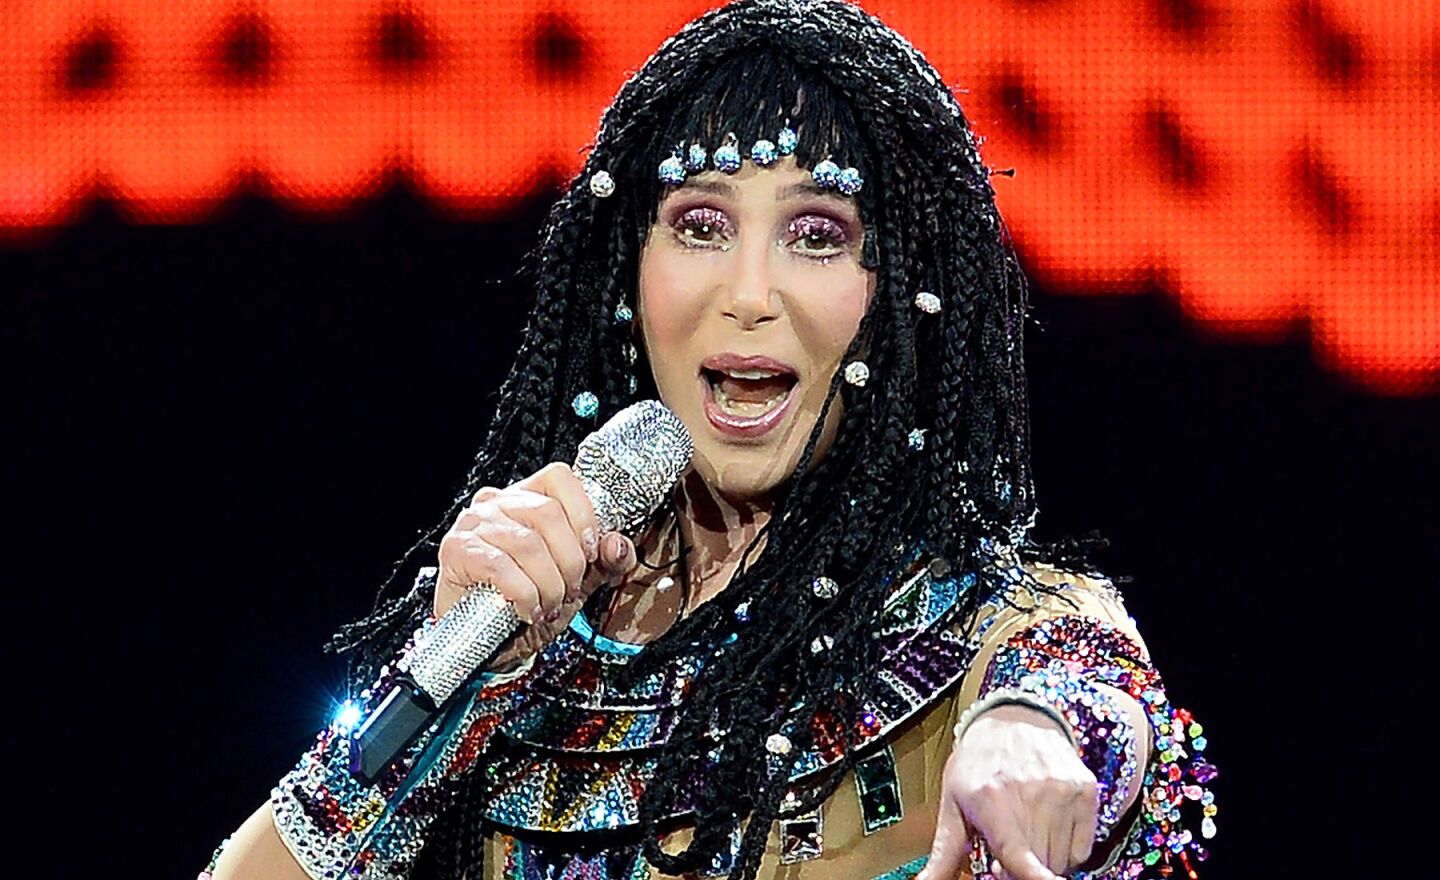 According to a false report that spread across Twitter (with a little help from Kim Kardashian) in January 2012, Cher was found dead in her home. A friend of the singer confirmed she is indeed alive.